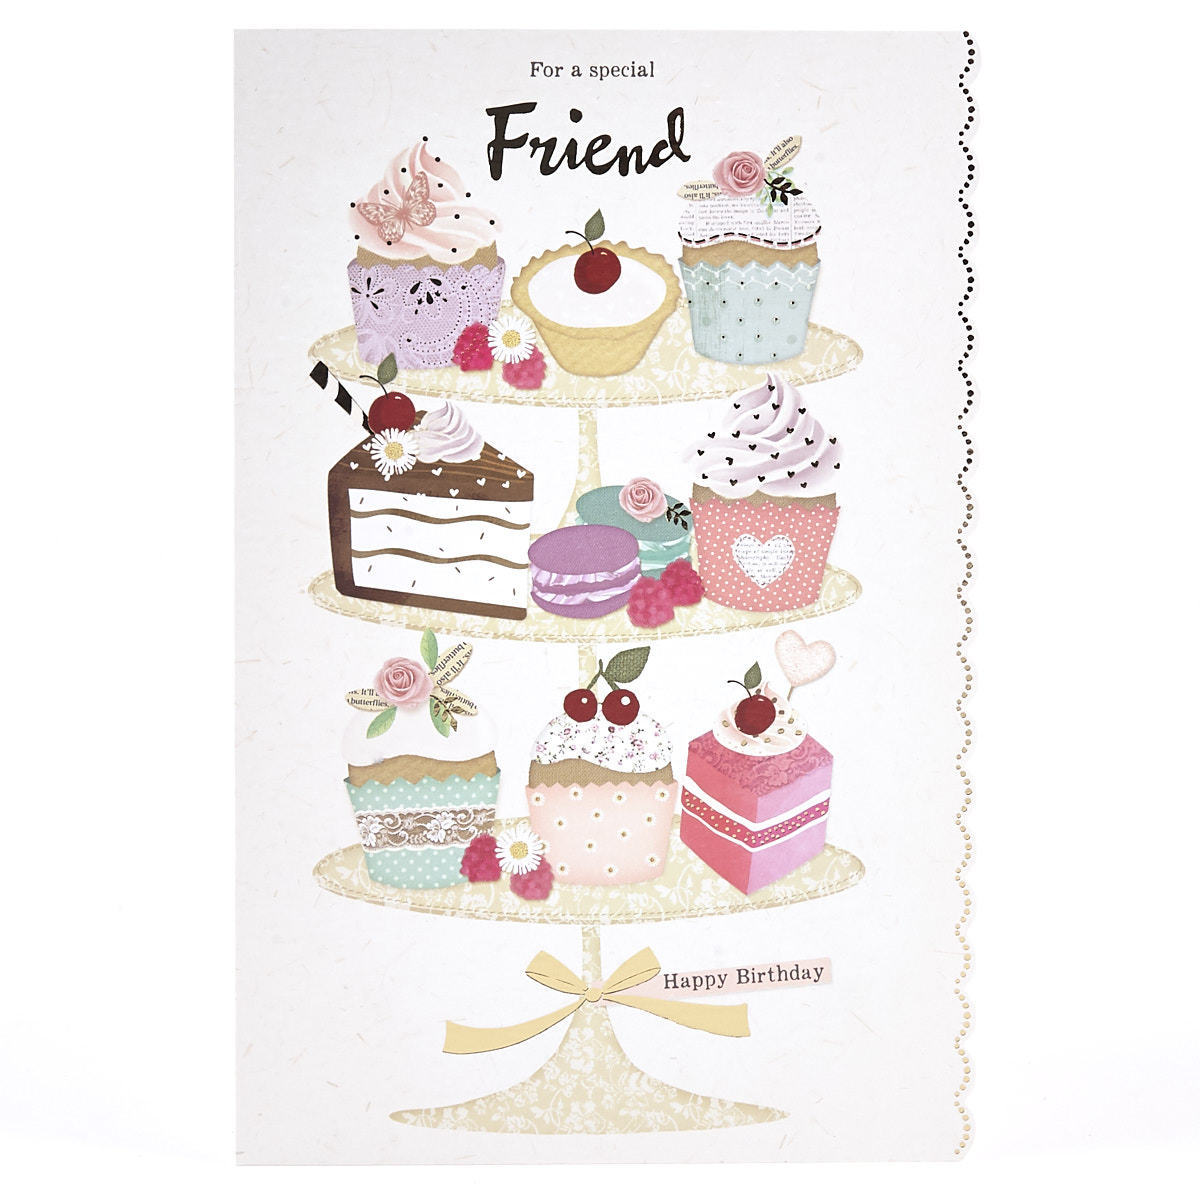 Special Friend Birthday Card - Cupcake Stand